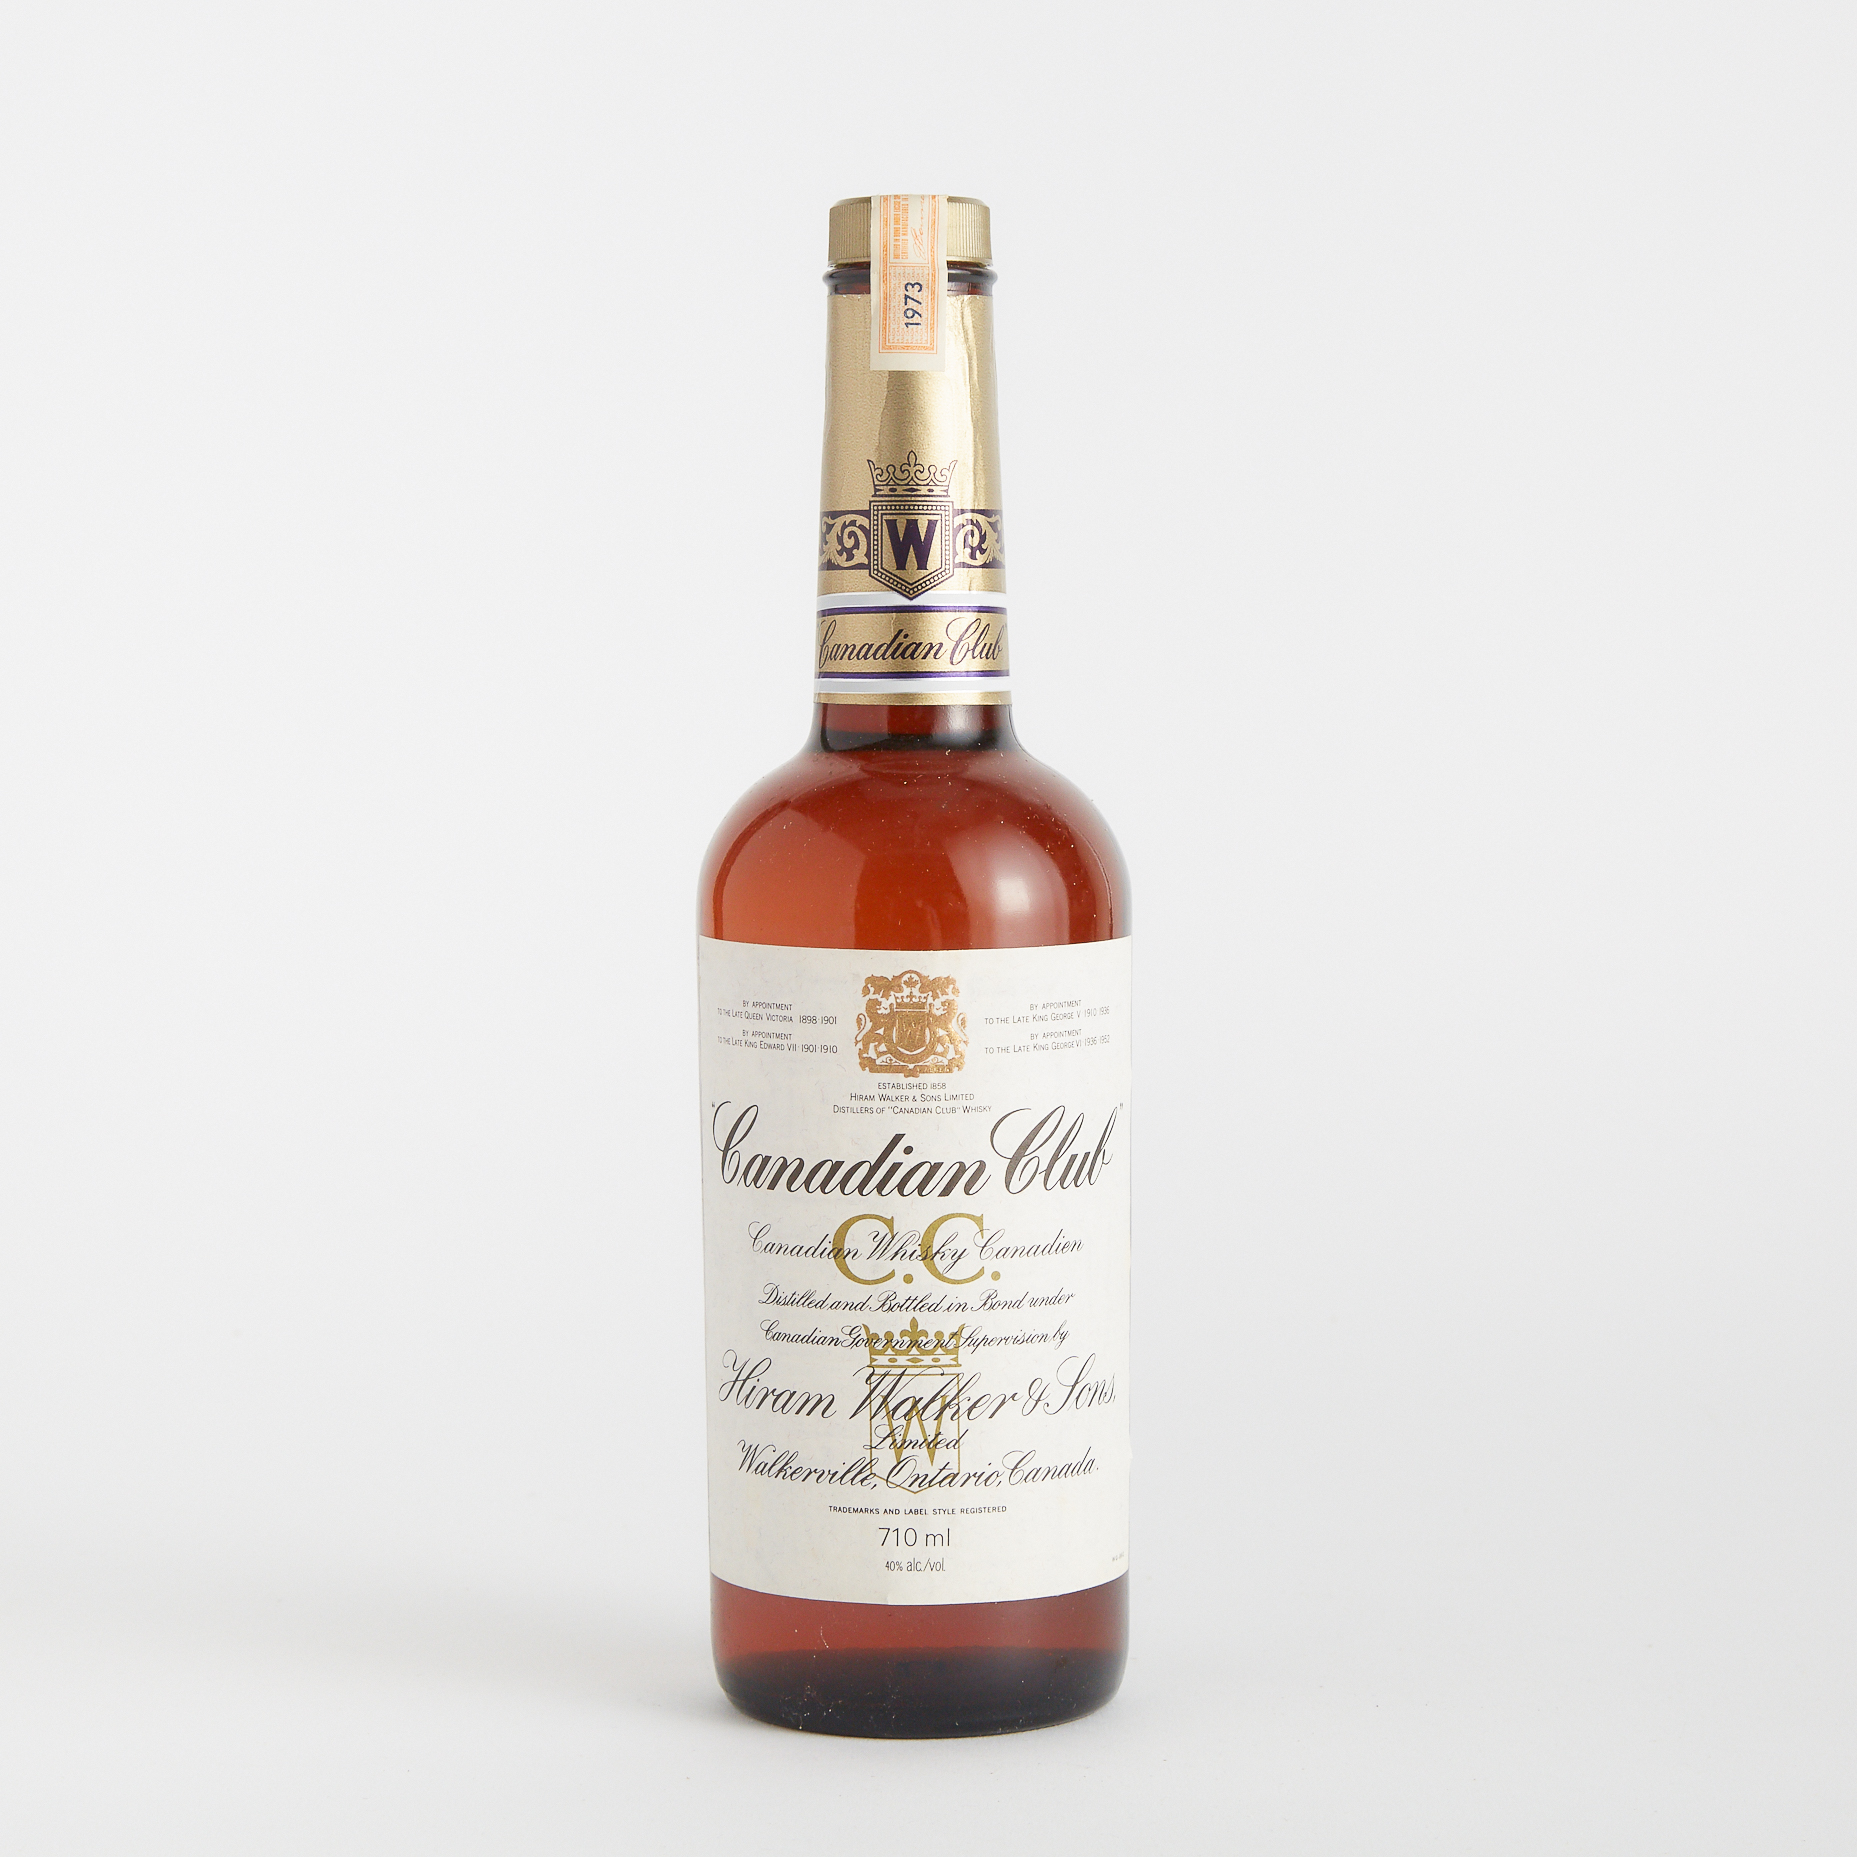 CANADIAN CLUB CANADIAN WHISKY (ONE 710 ML)